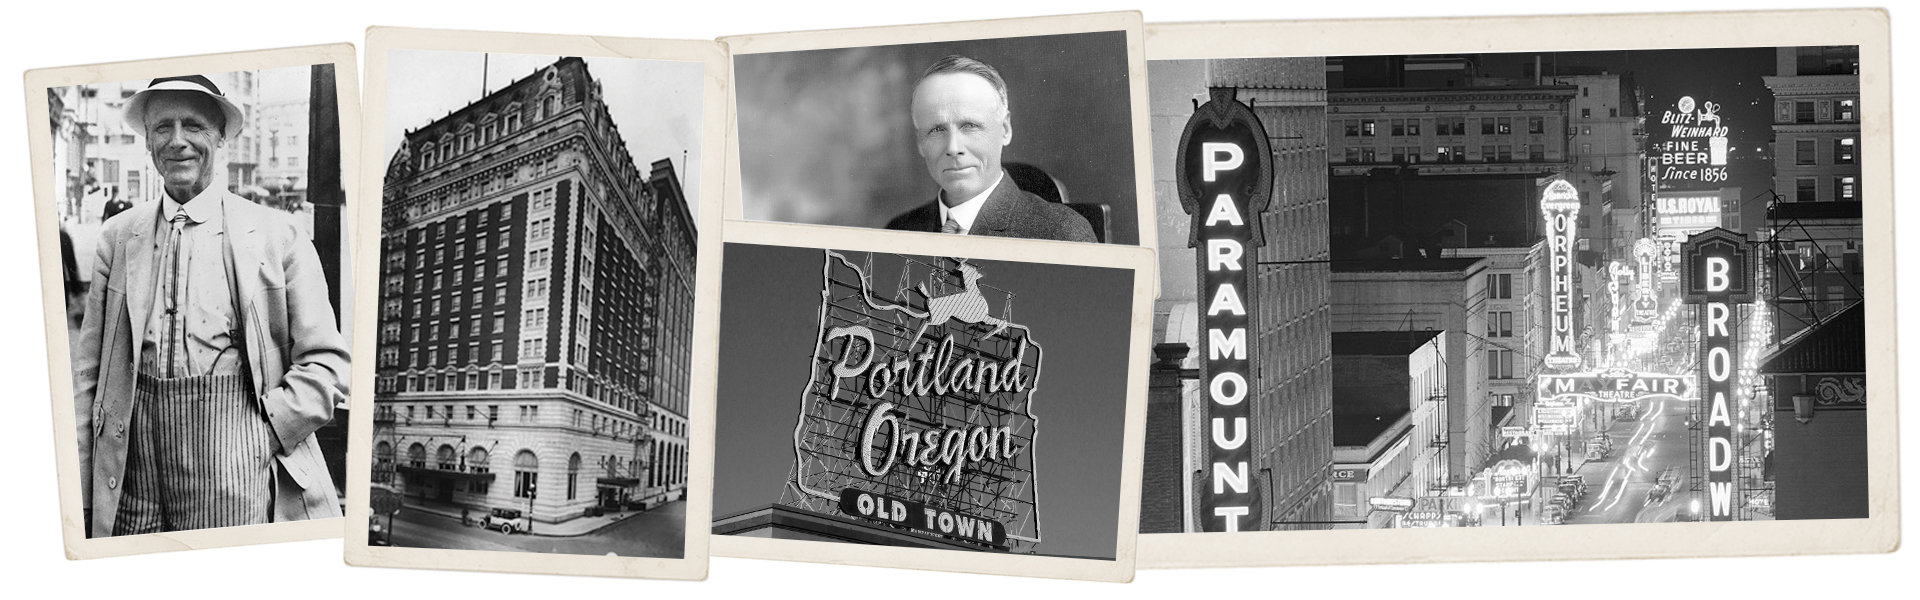 The Benson Hotel Historical Collage | Hotel Marketing Firm in Seattle | CMA